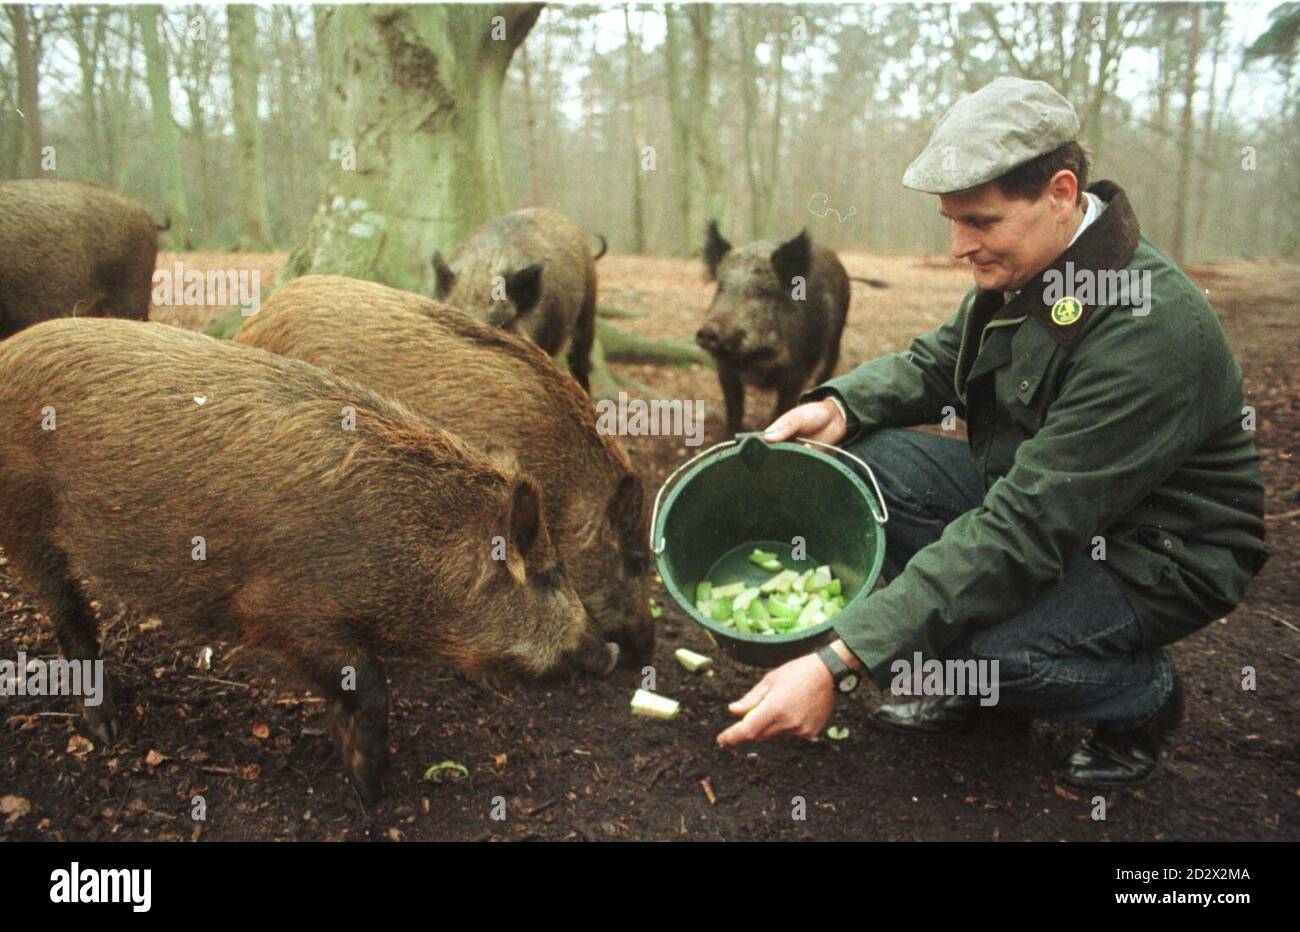 Forestry Commission tractor driver Peter Bessant  gamekeeper welcomes a family of wild boar into the Forest at Longdown today (Wednesday). Mr Bessant's great-grandfather Charlie Bessant, shot the last wild boar in 1905, at Worts Gutter, near Brockenhurst, Hampshire, at the end of a campaign to wipe the animals out.  *21/01/04: Farmers are being warned about a resurgence in the number of wild boar roaming woodlands in certain parts of England, it emerged. The alarm was raised after farming leaders in the West Midlands blamed the tusked animal for savaging livestock, damaging crops and impregnat Stock Photo